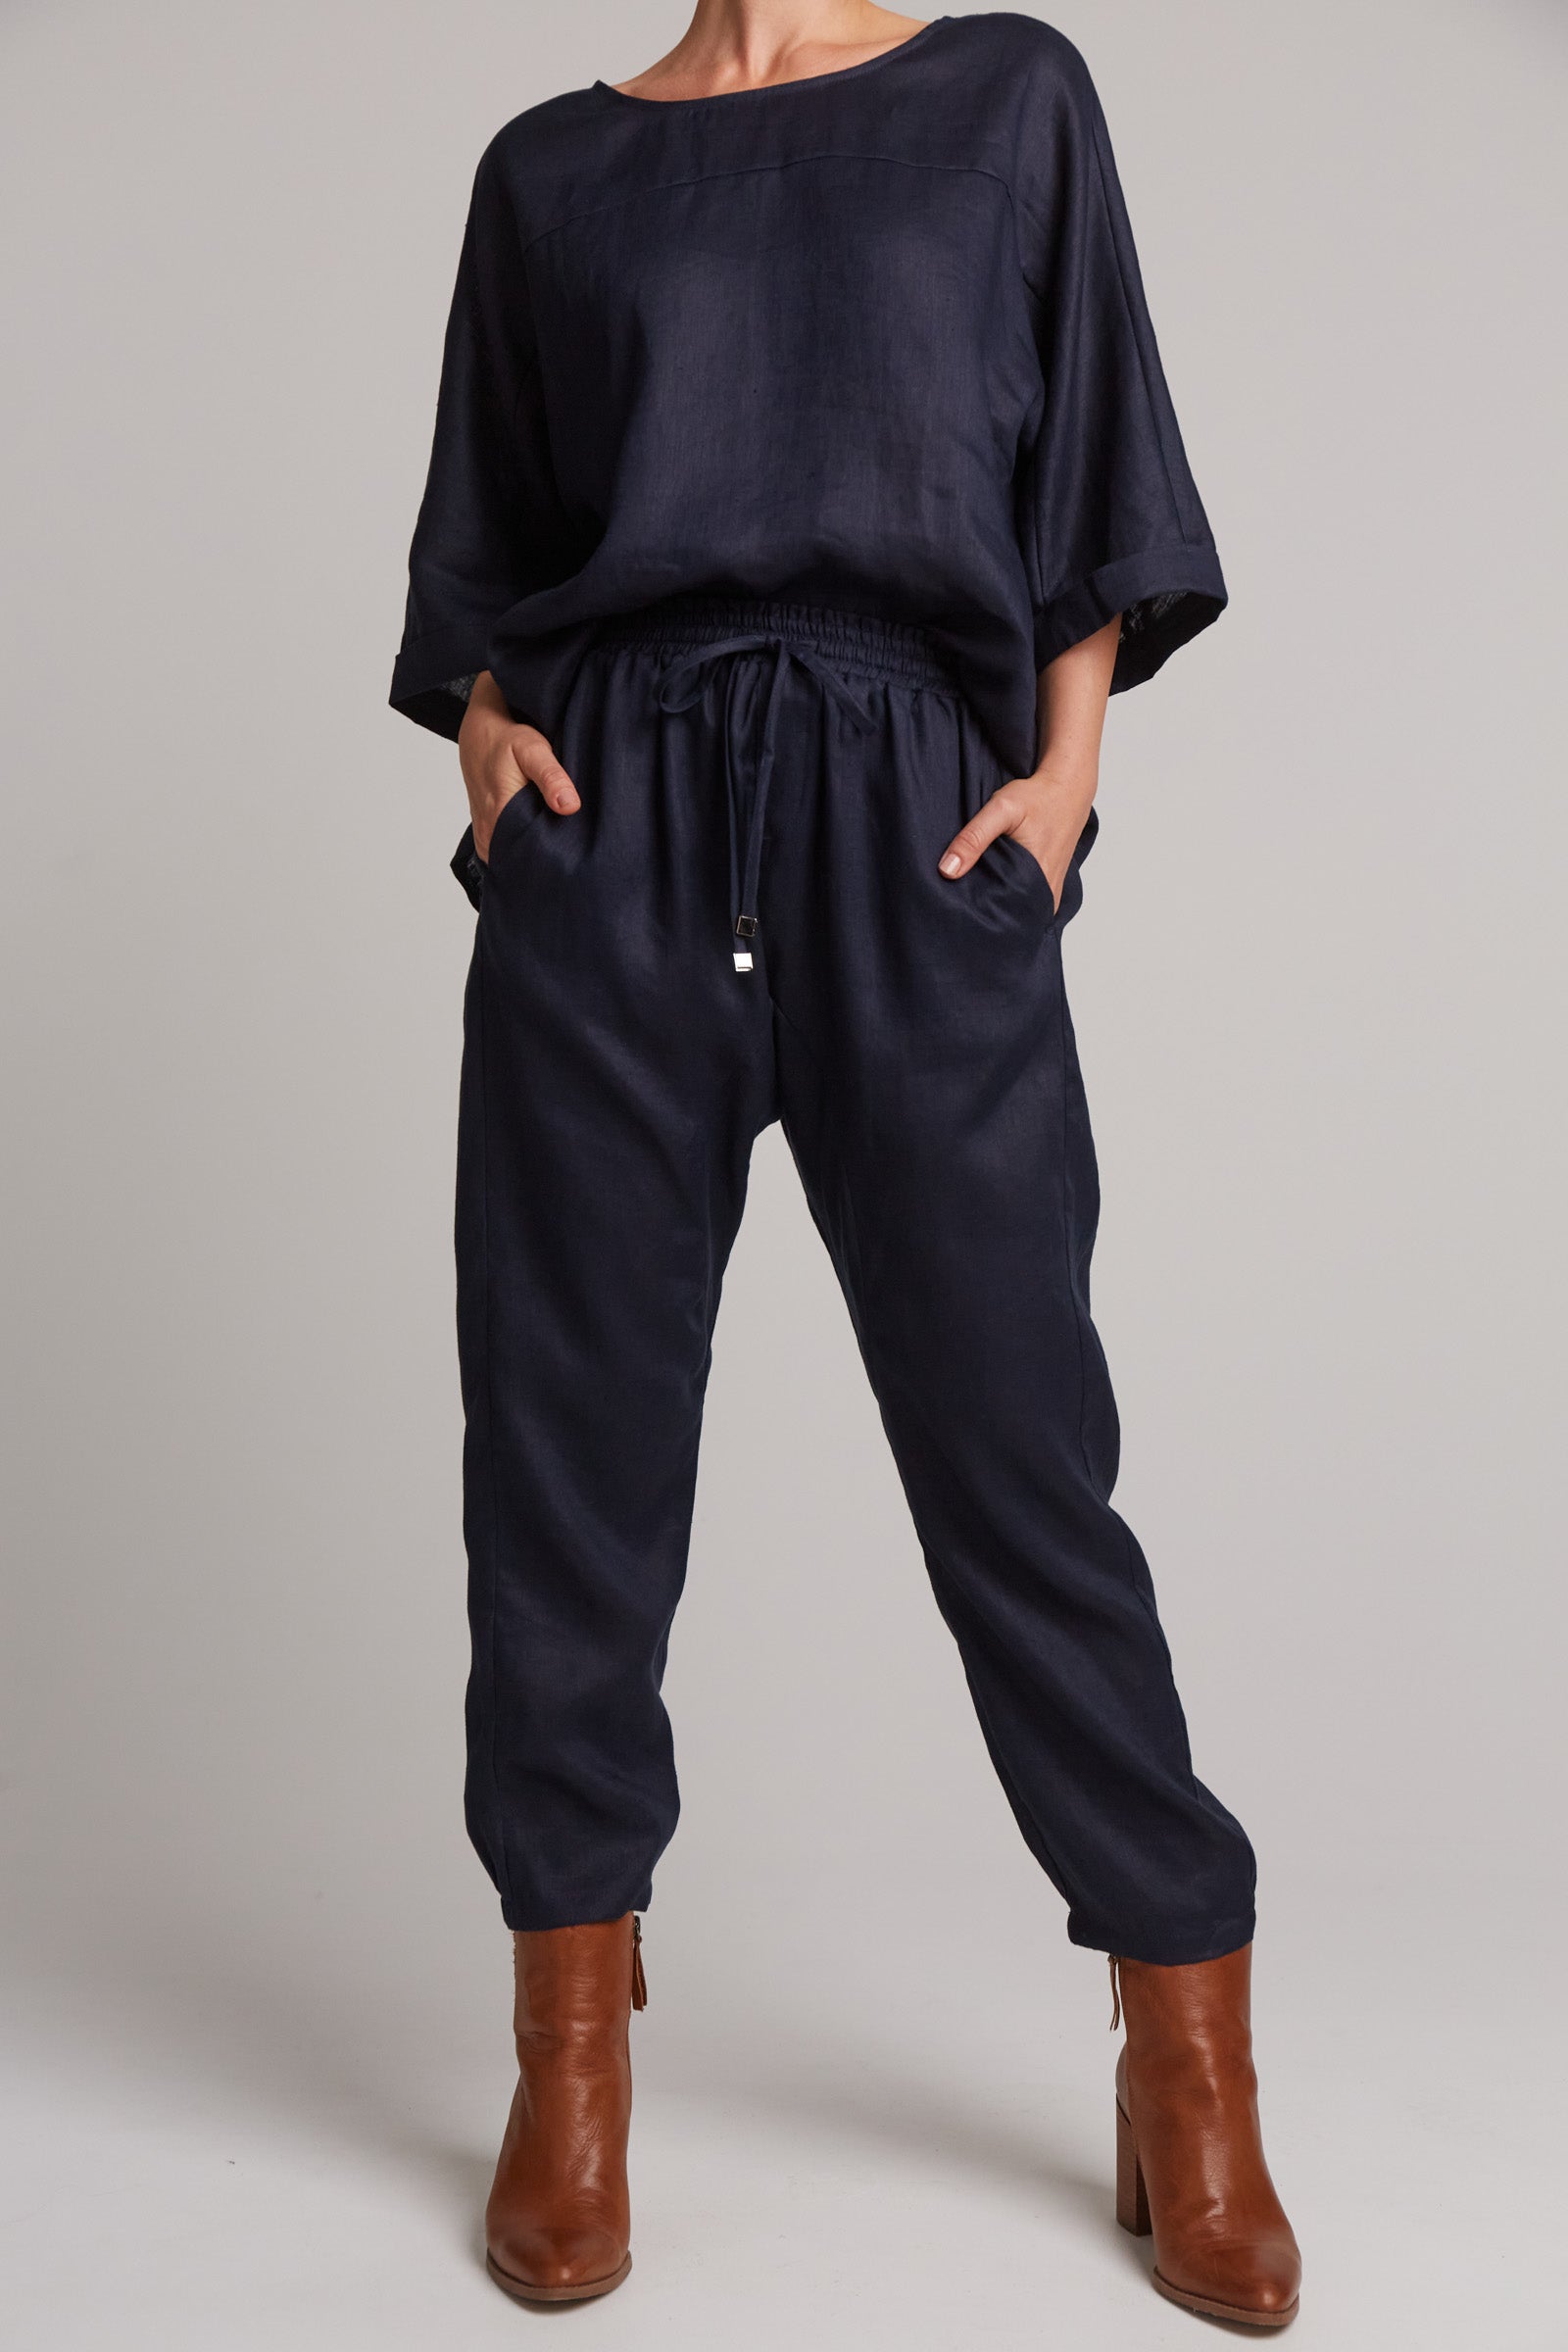 Studio Relaxed Pant - Navy - eb&ive Clothing - Pant Relaxed Linen